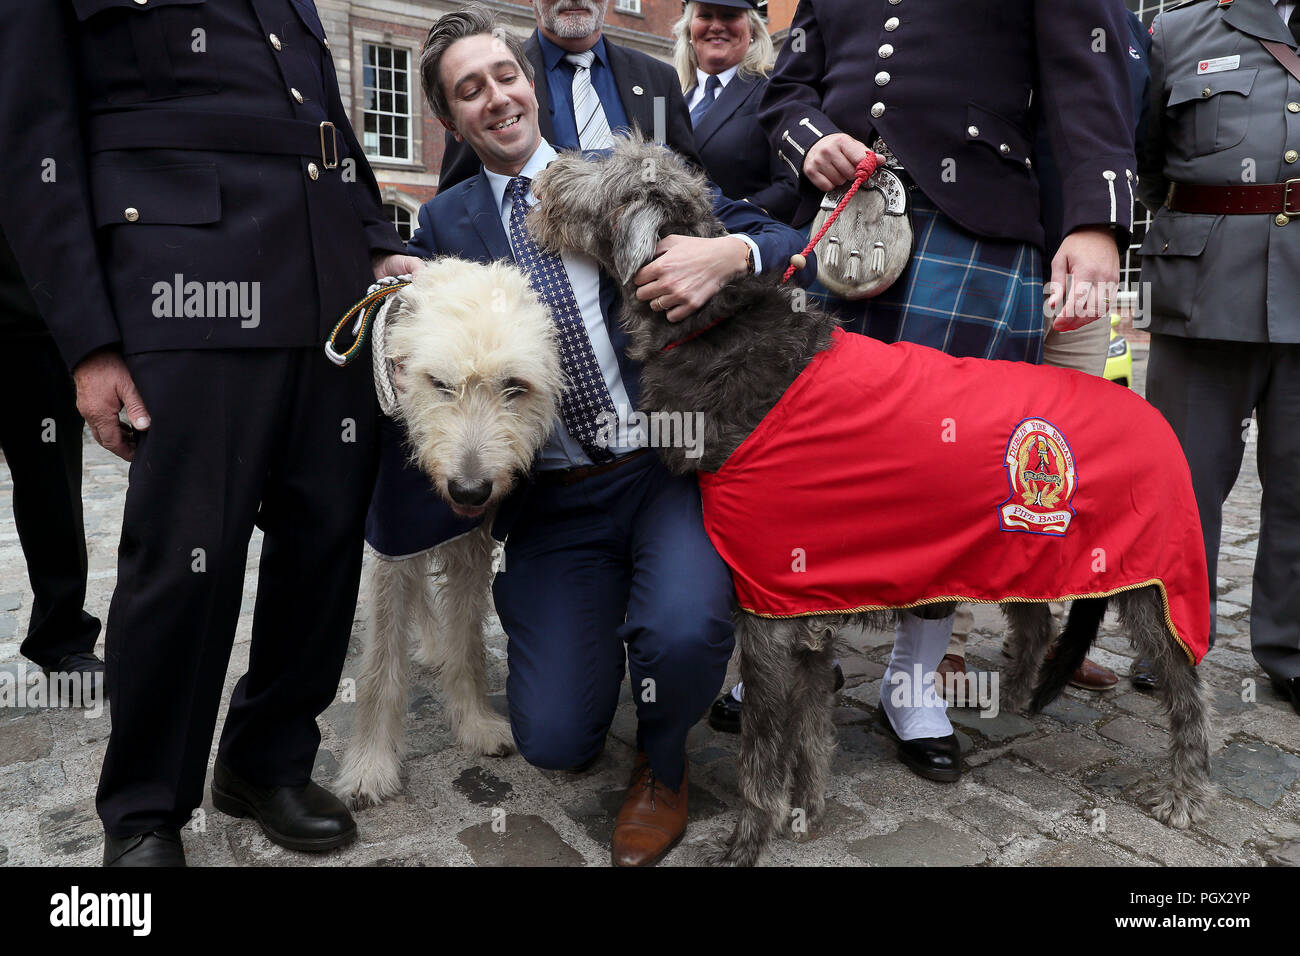 Minister for Health Simon Harris with Irish wolfhounds Darcy (left), mascot to the ambulance service, and Seodin, mascot to the Dublin fire brigade, at the launch of a new national day to recognise the unsung heroes from frontline and emergency services at Dublin Castle. Stock Photo